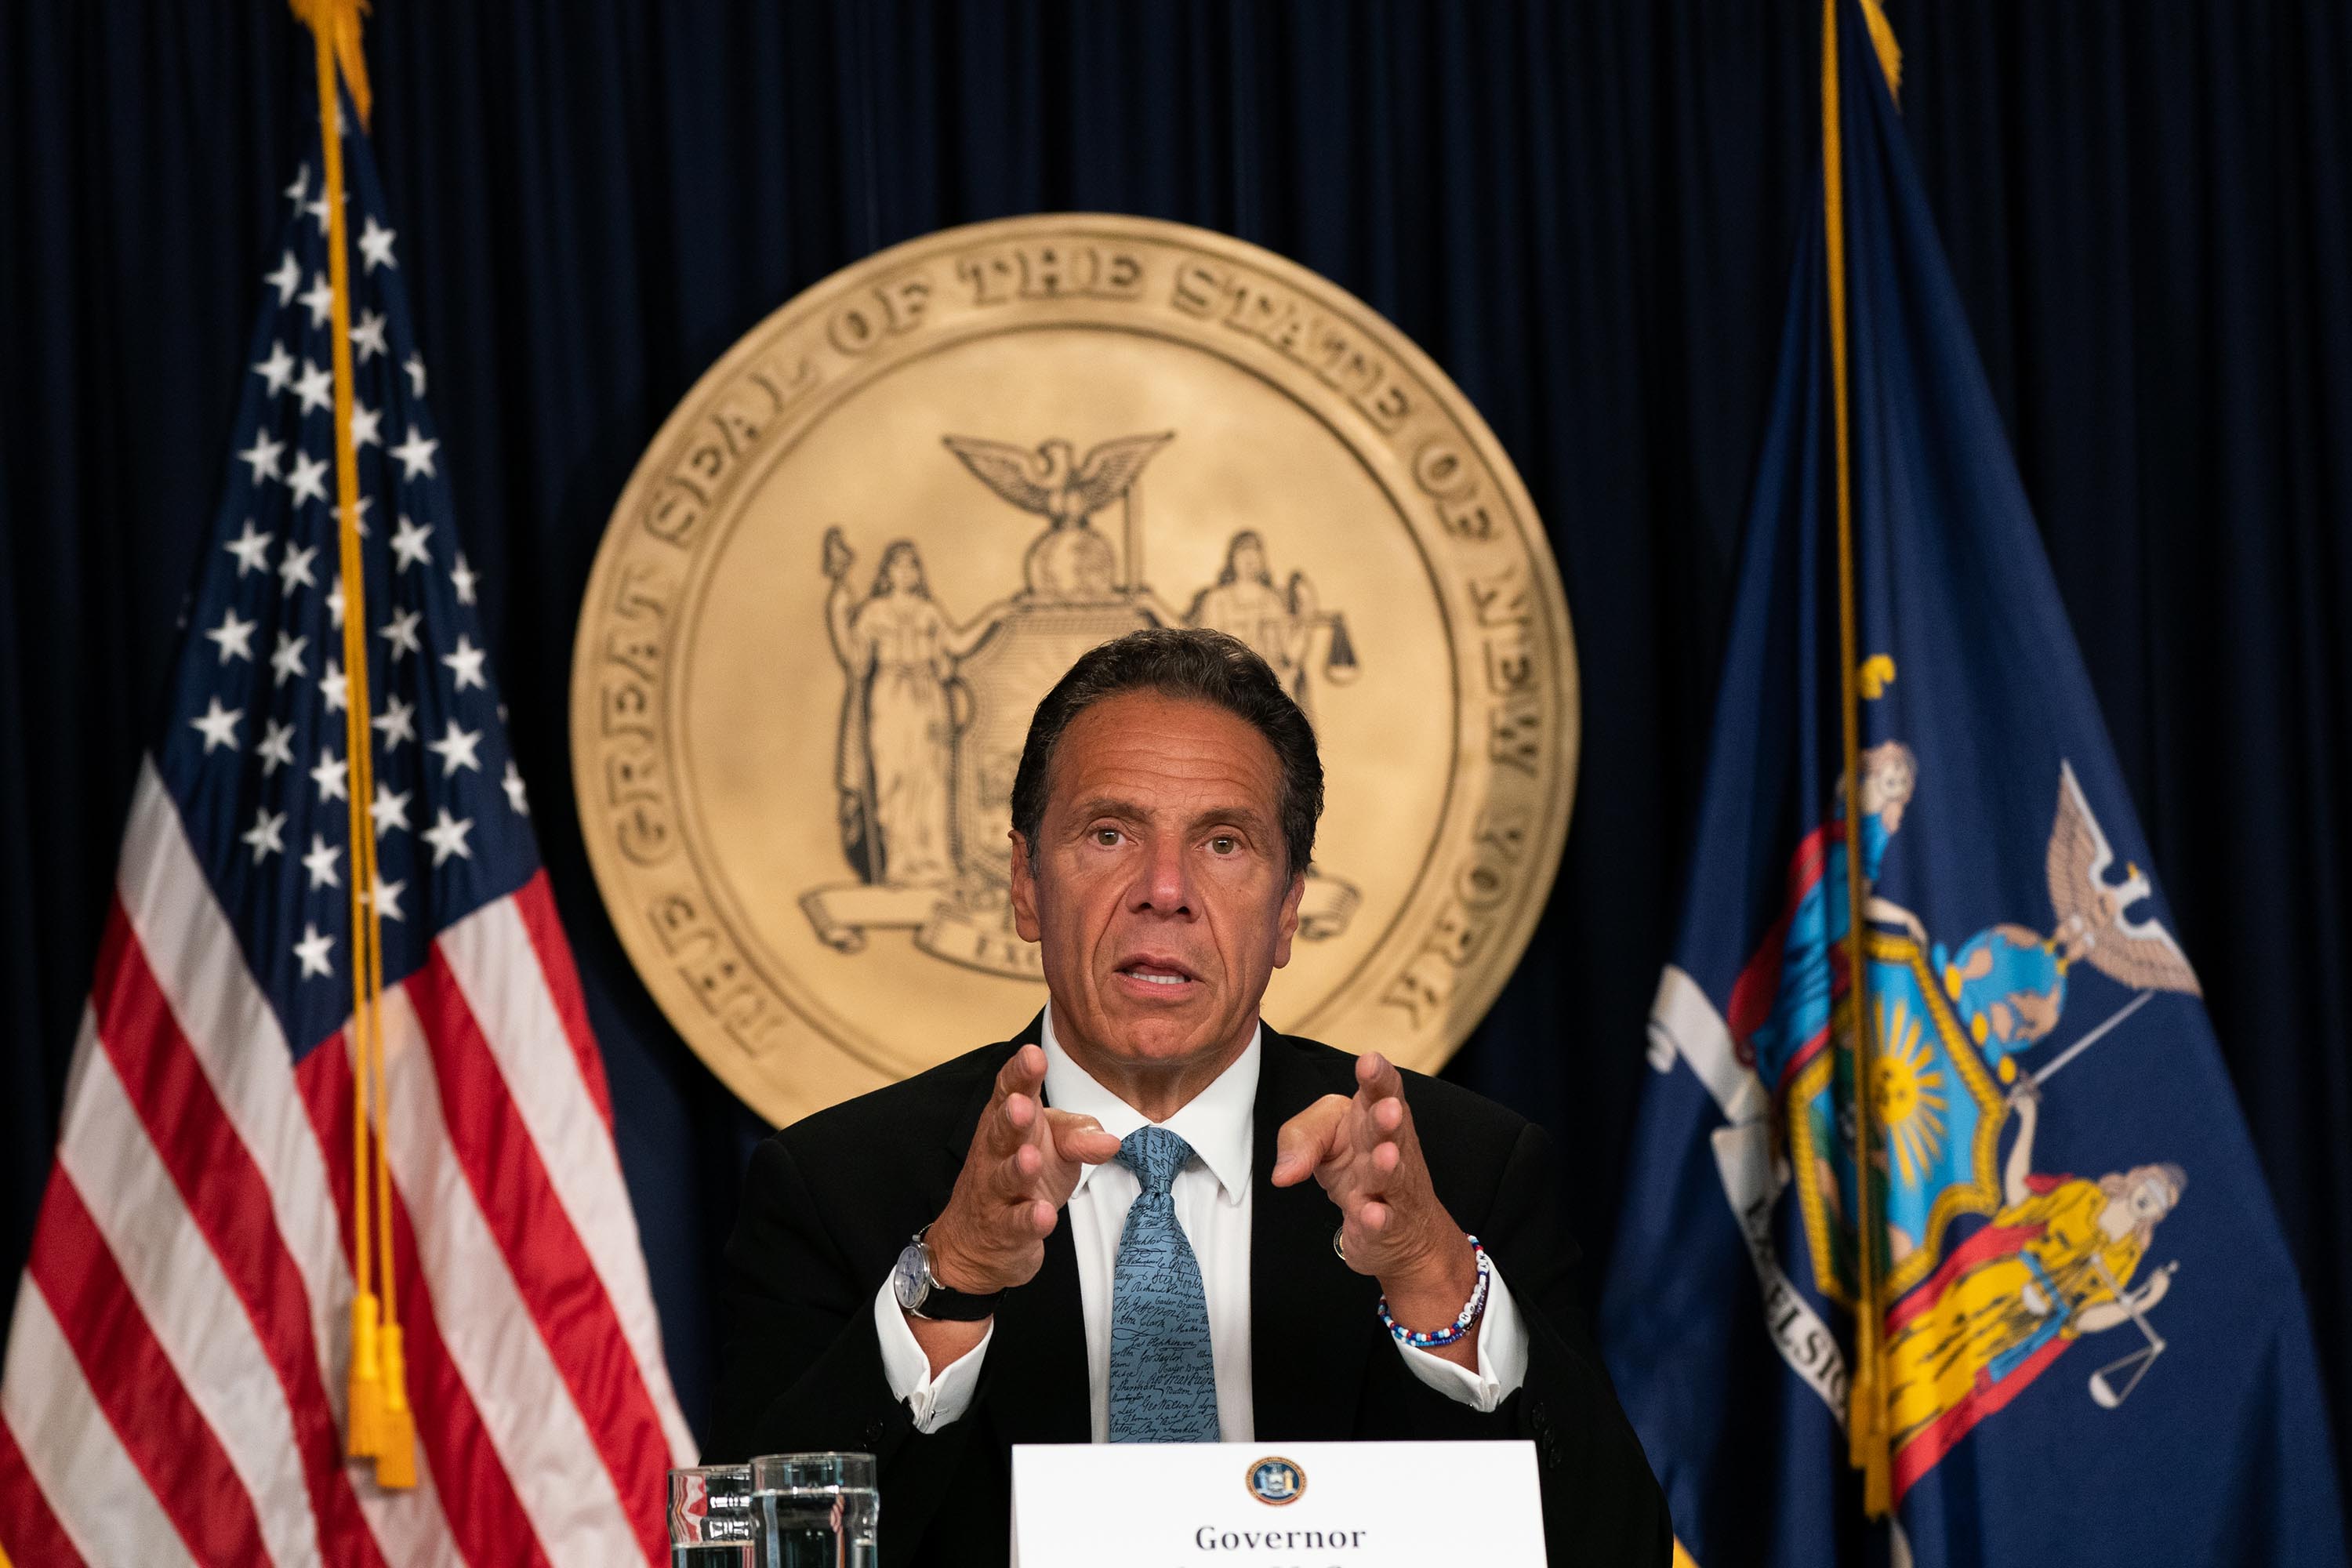 New York Gov. Andrew Cuomo is pictured speaking during a daily media briefing in New York City on July 23.